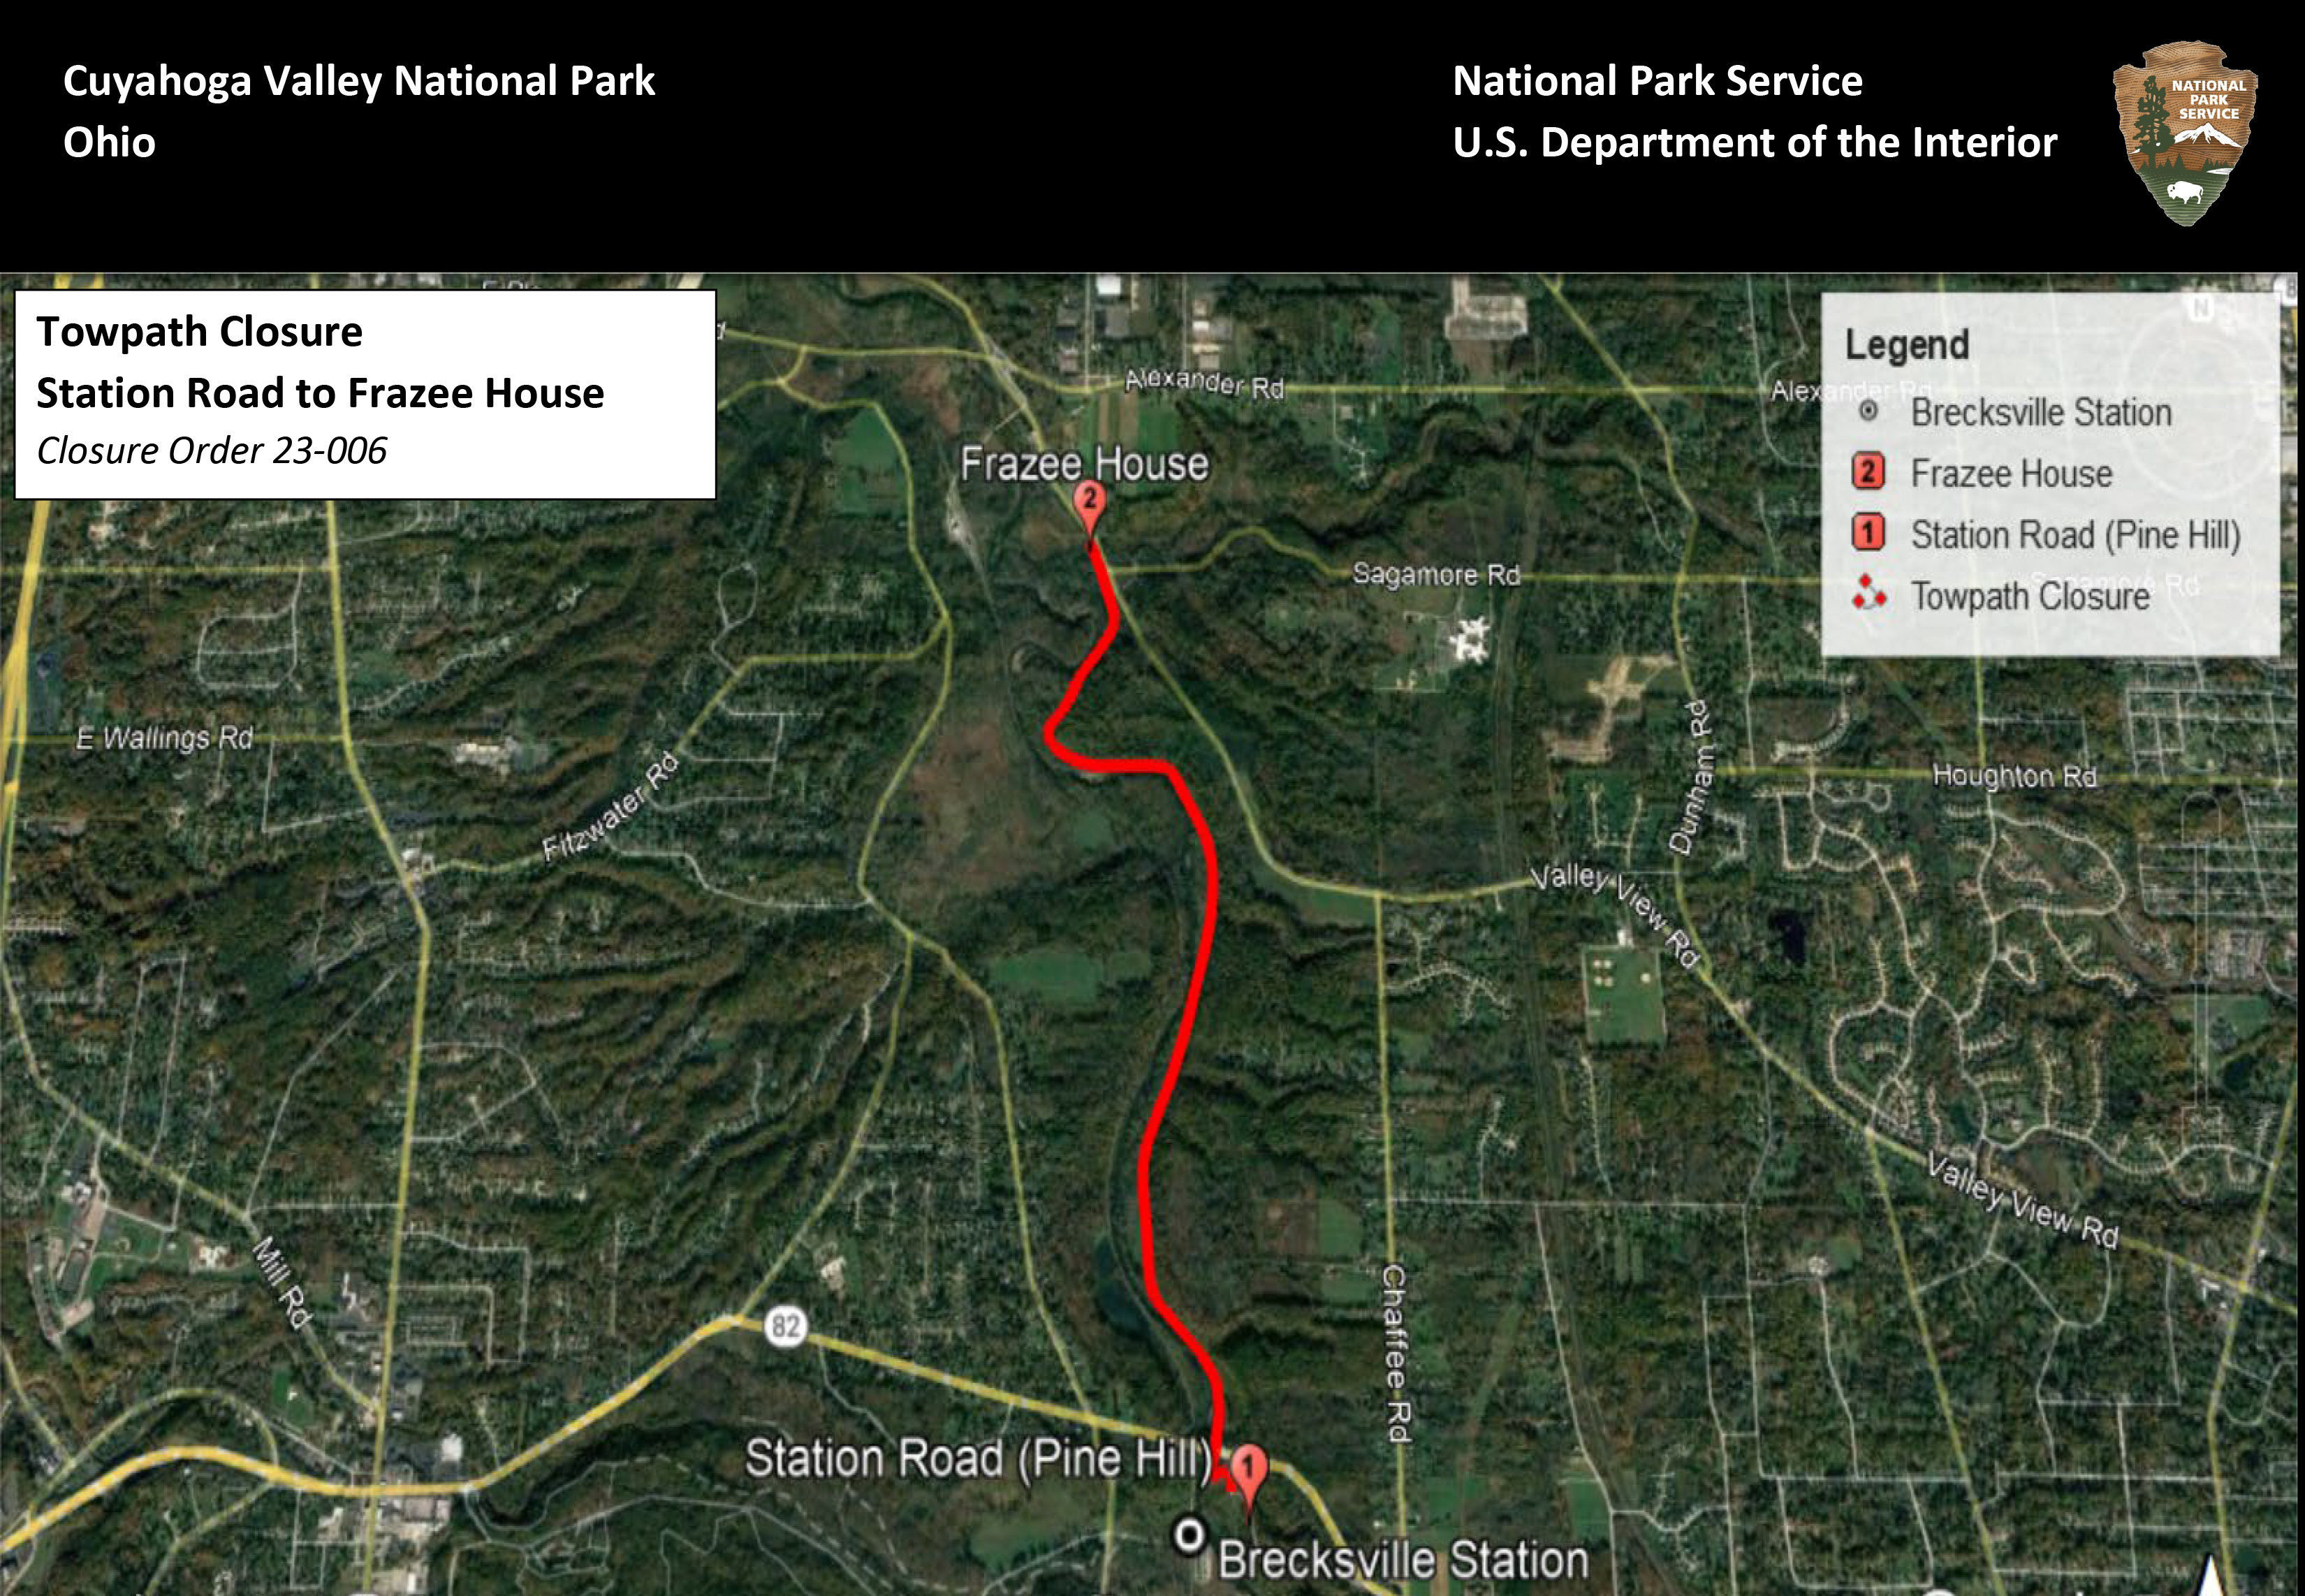 A map of a towpath closure from Station Road to Frazee House.